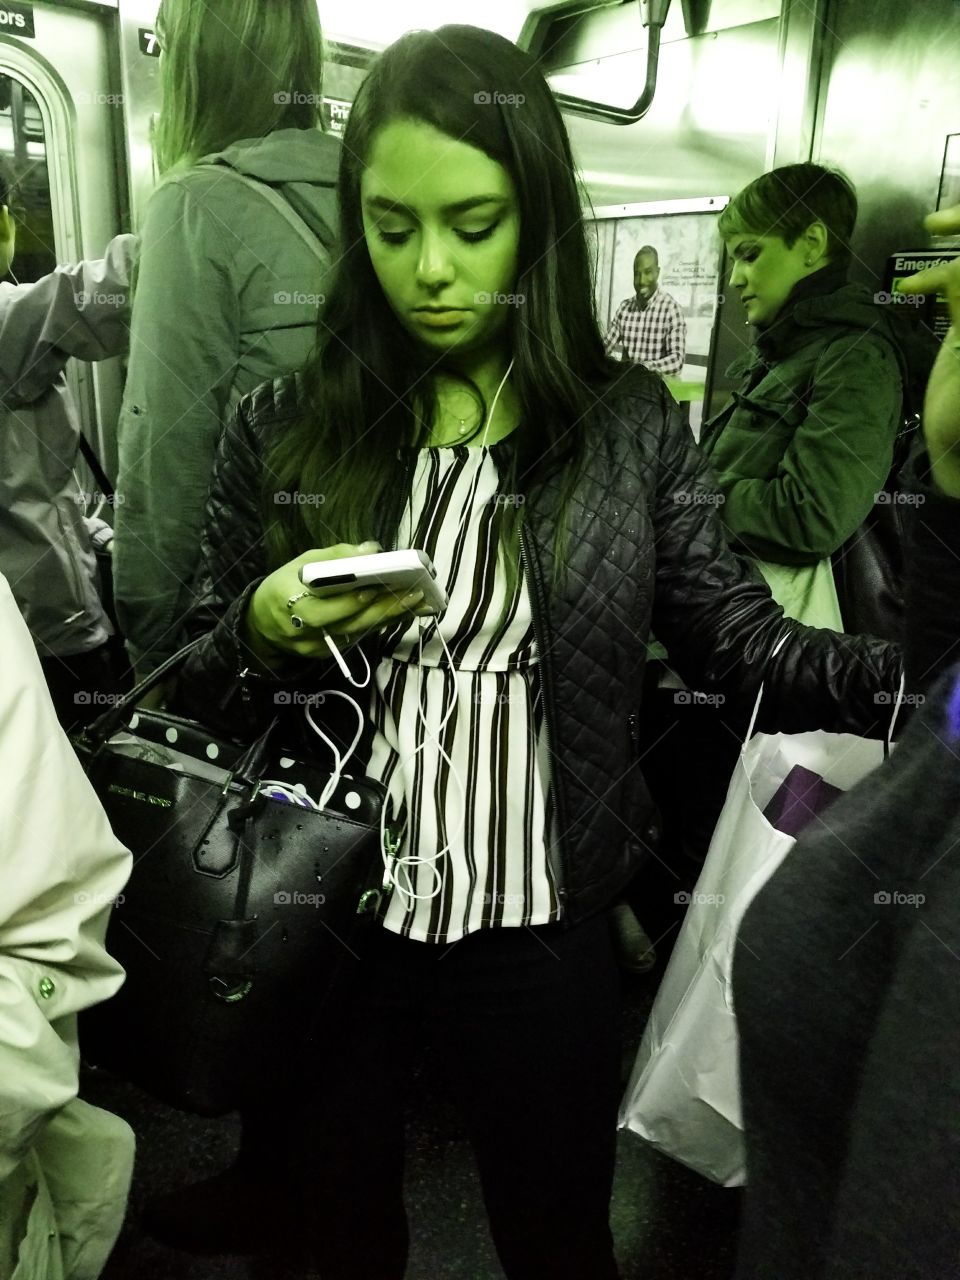 Girl Riding Subway in NYC Looking at her Phone. Green Filter.